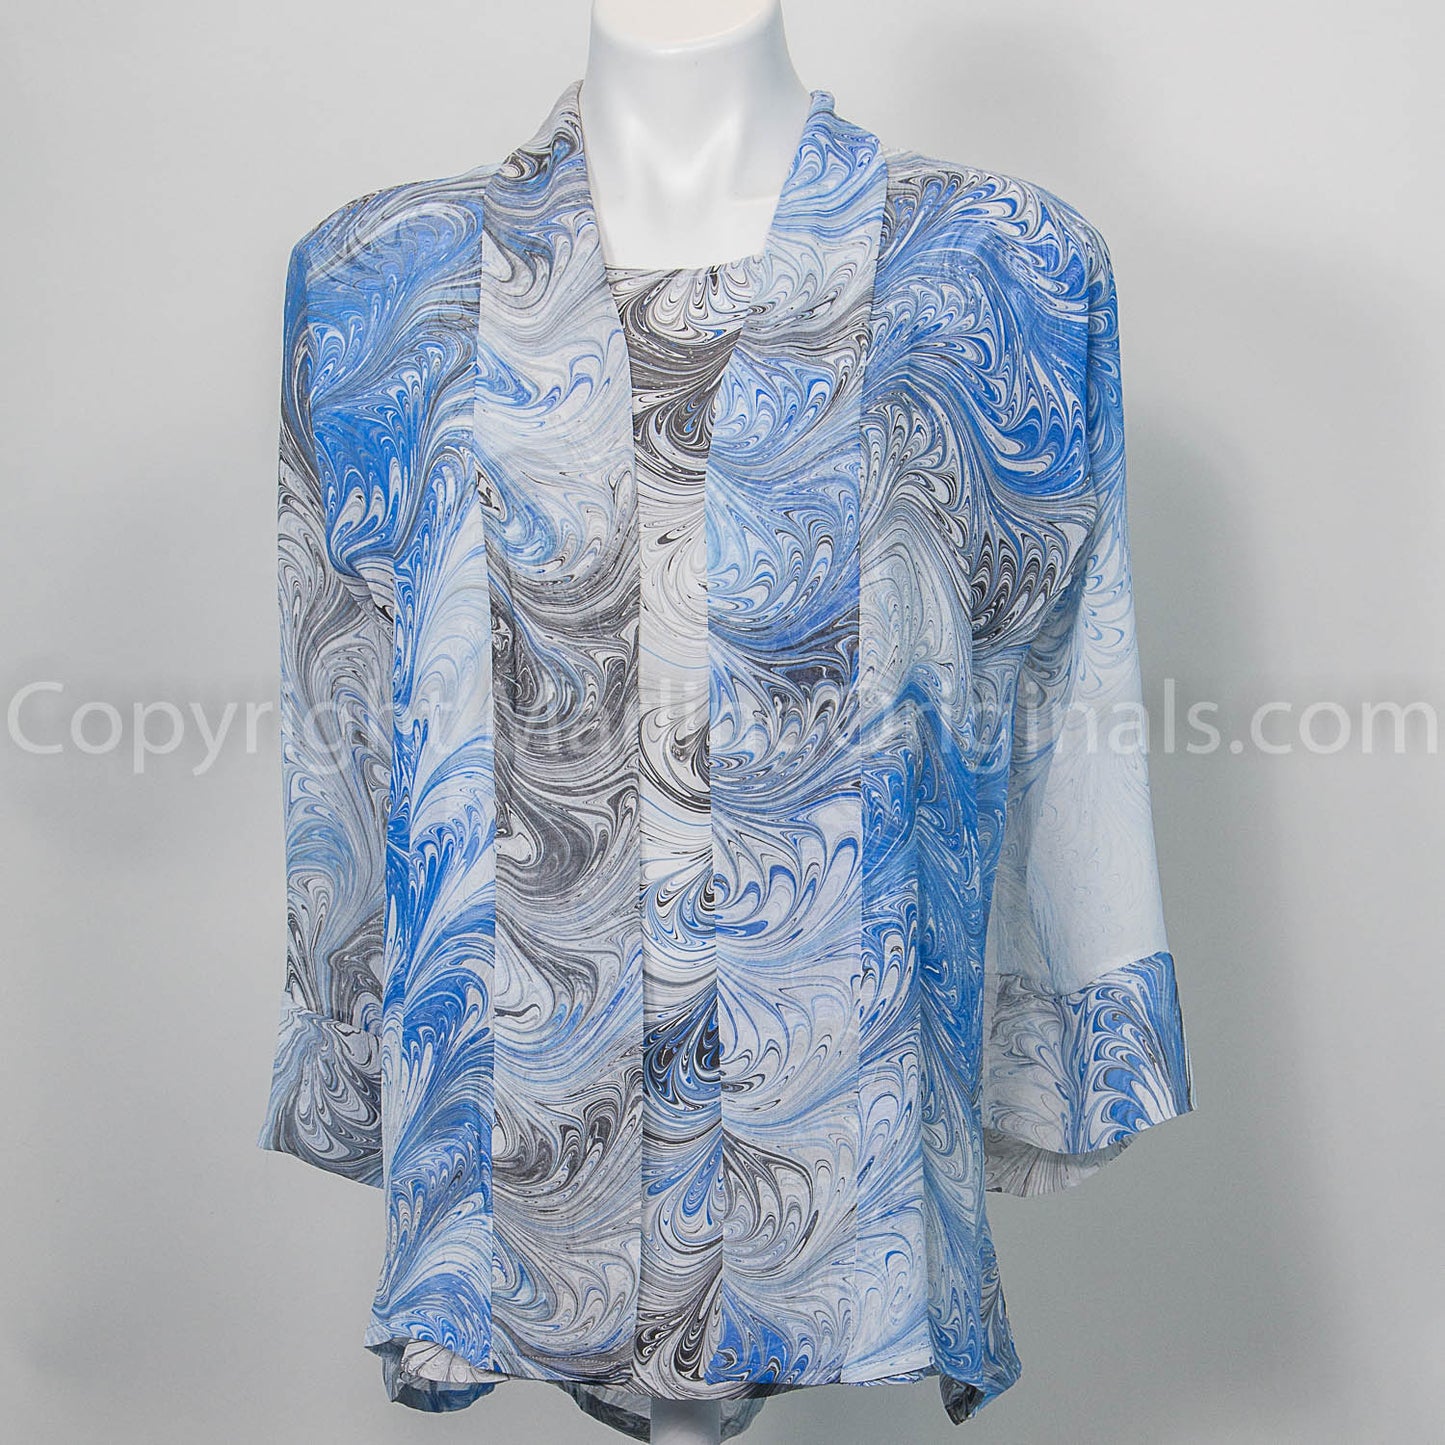 hand painted silk kimono style jacket shown with short sleeve silk top in blue, black and white